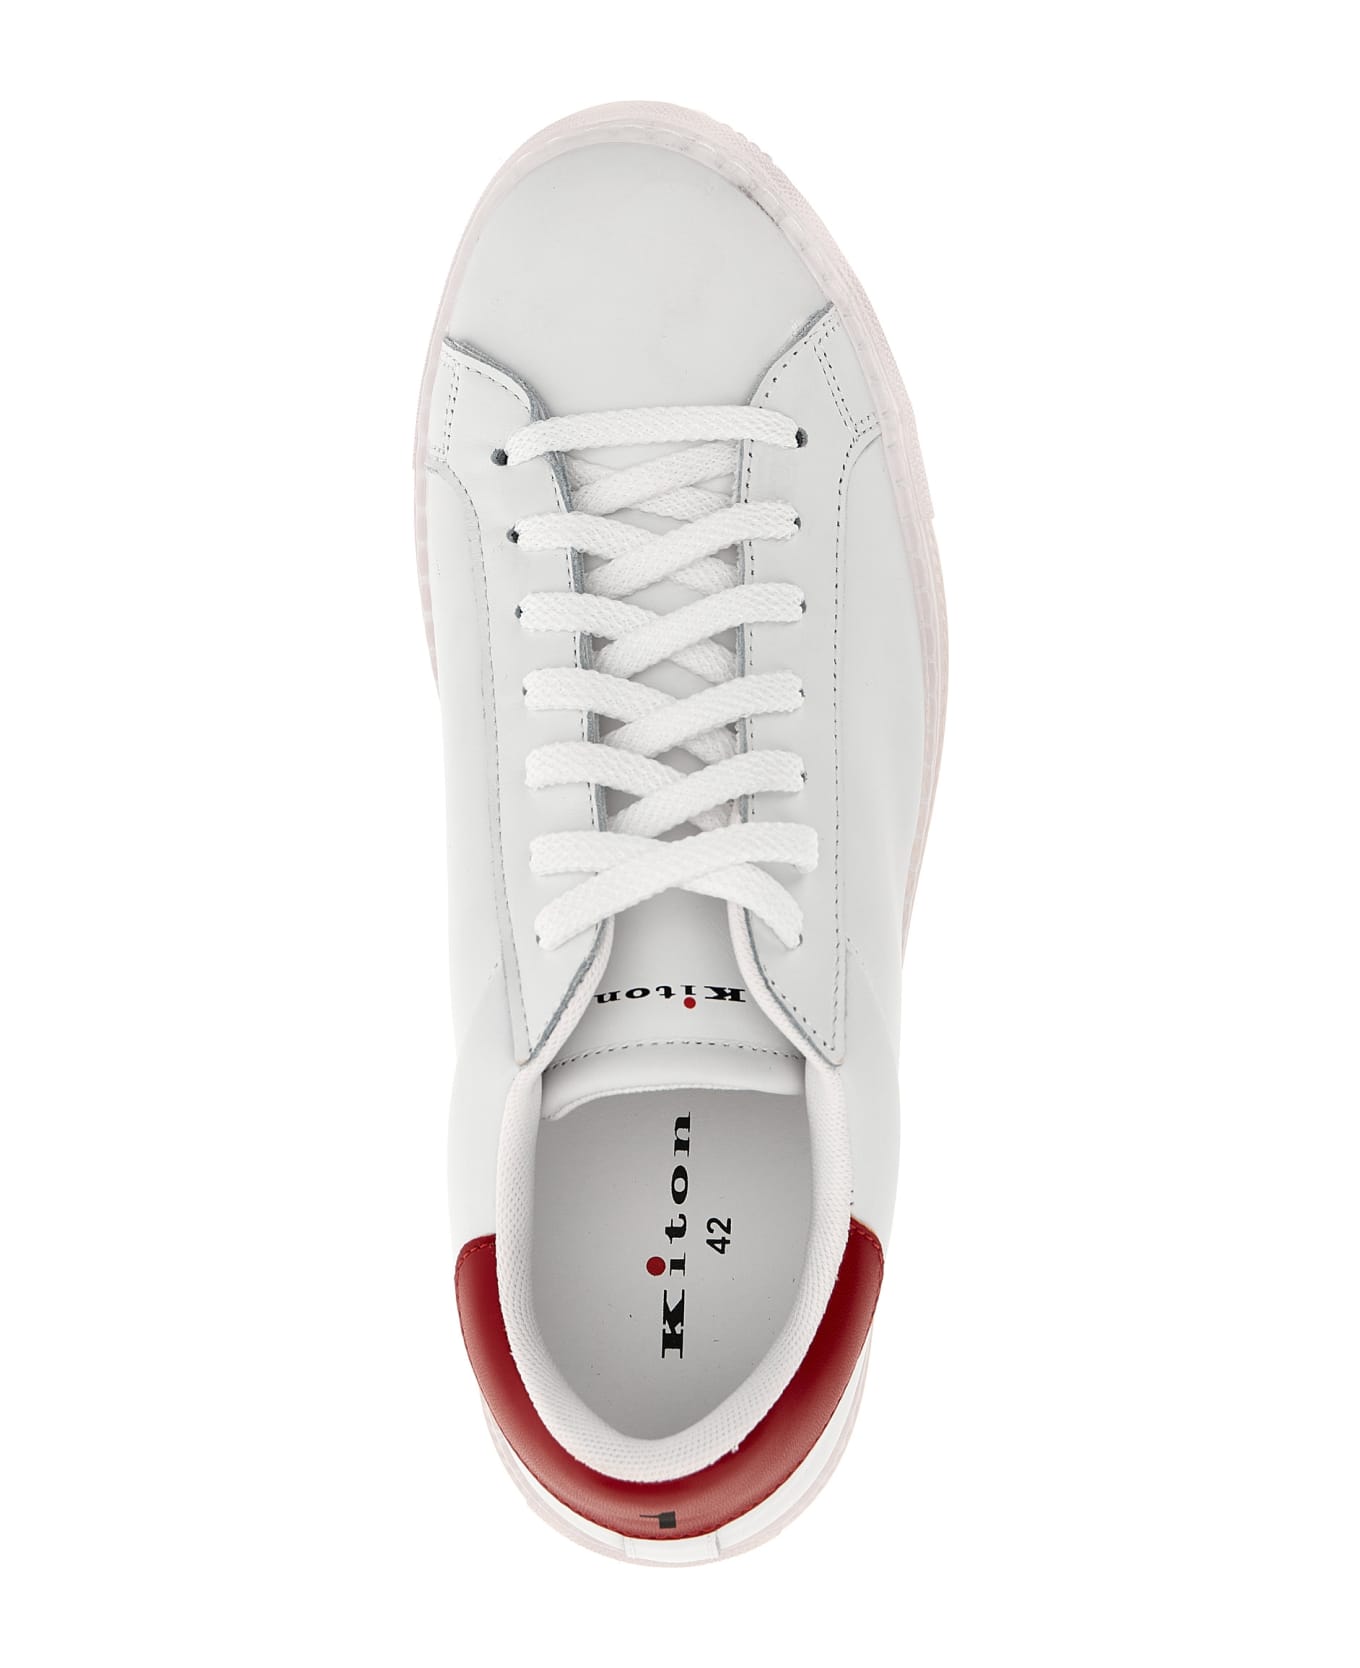 Kiton 'ussa088' Sneakers - Red スニーカー